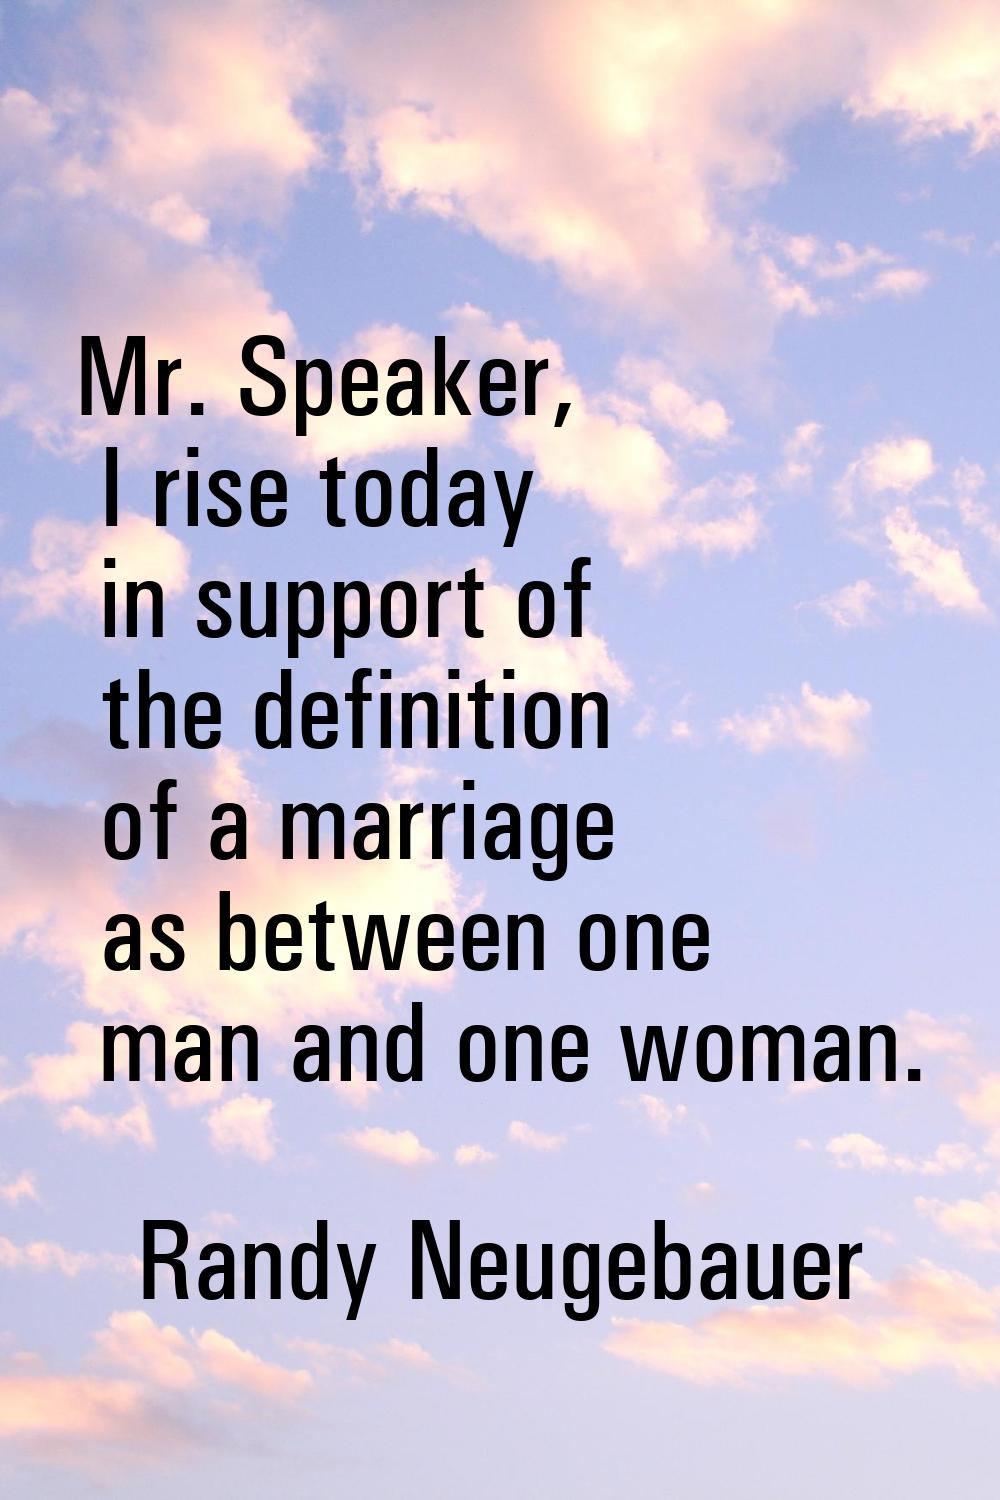 Mr. Speaker, I rise today in support of the definition of a marriage as between one man and one wom